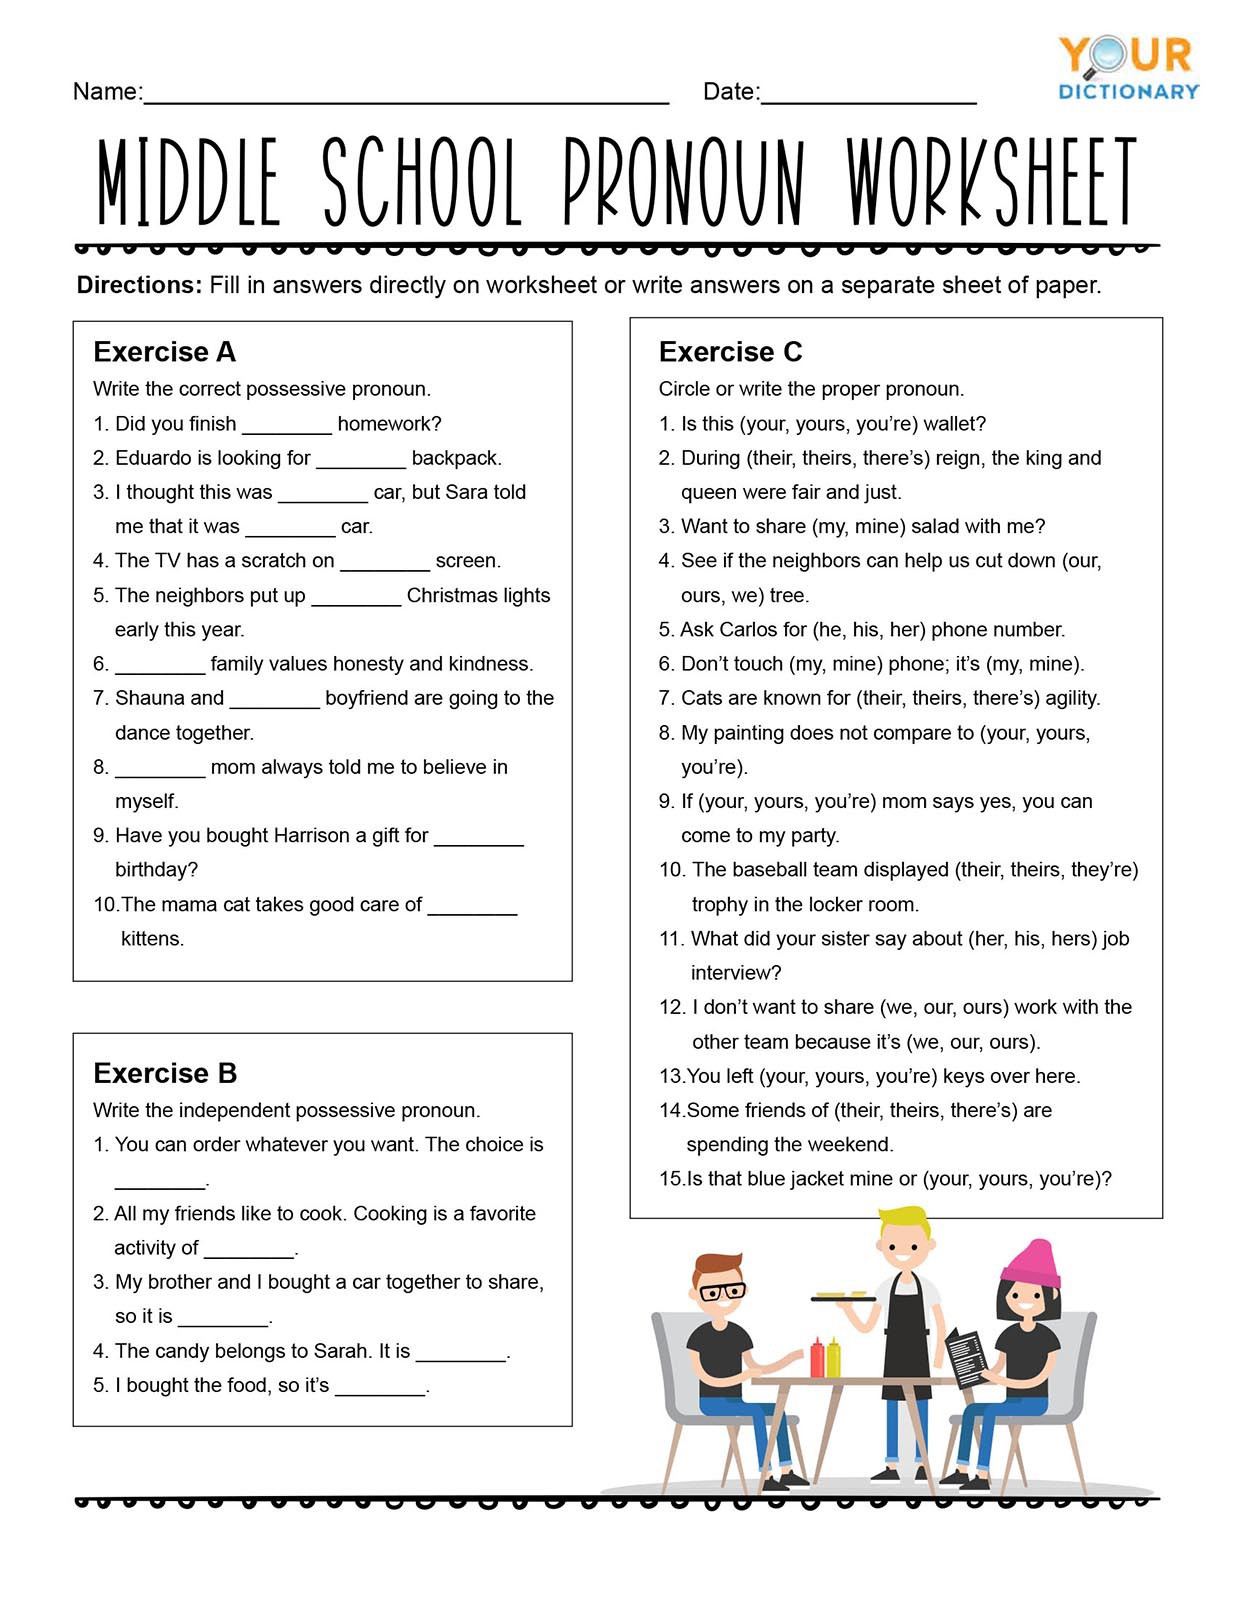 Pronoun Worksheets 5th Grade Pronoun Worksheets for Practice and Review